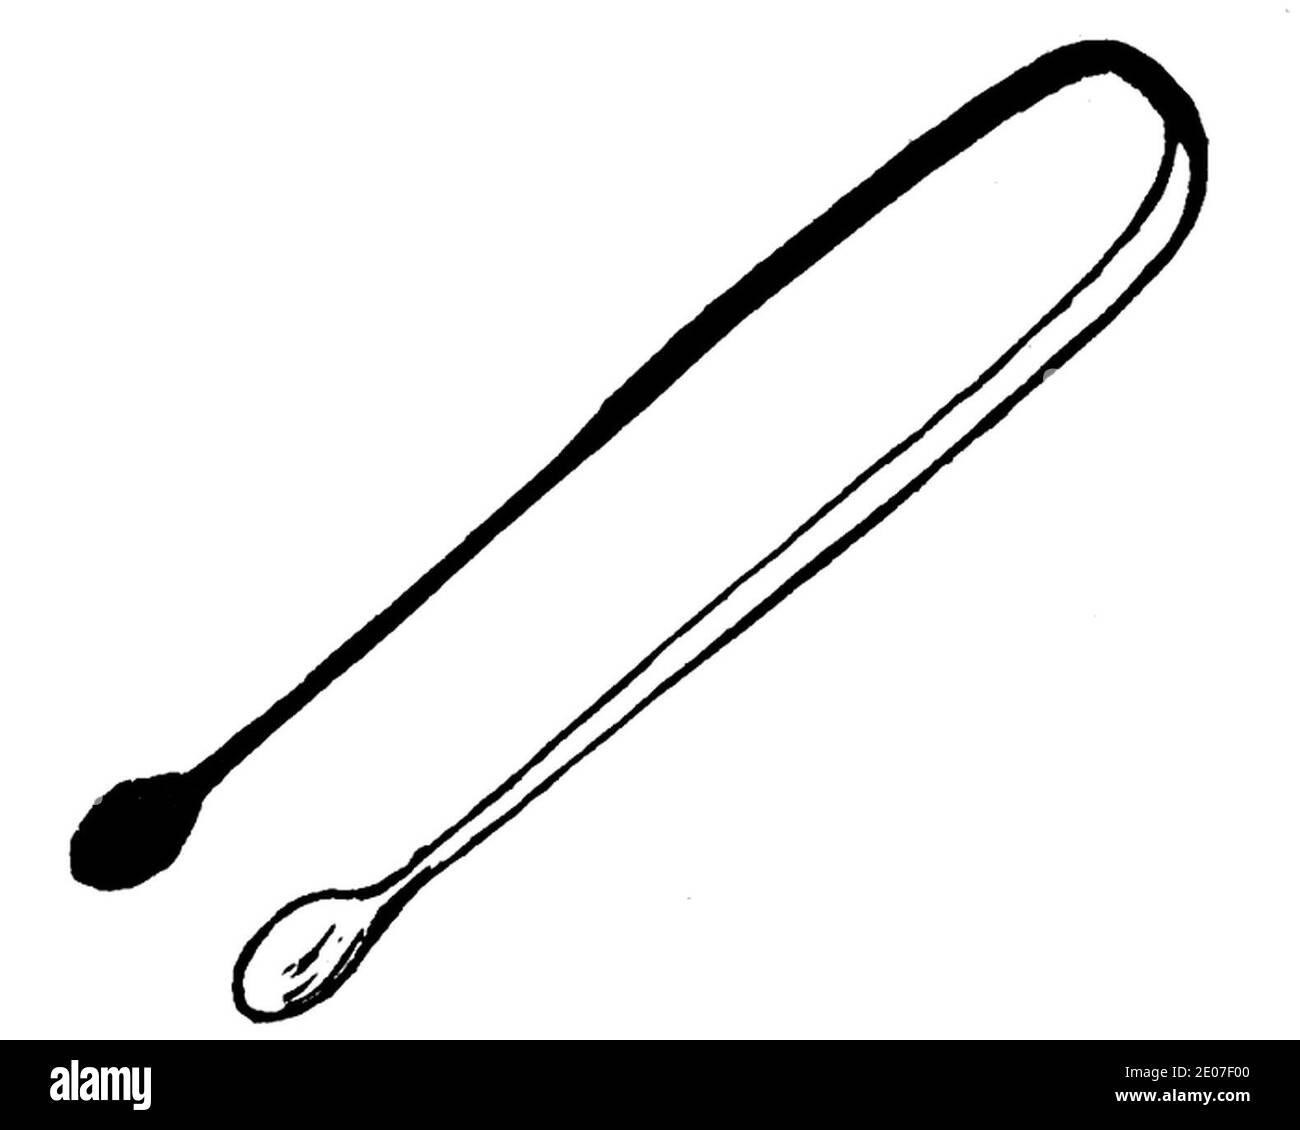 Sugar tongs Black and White Stock Photos & Images - Alamy